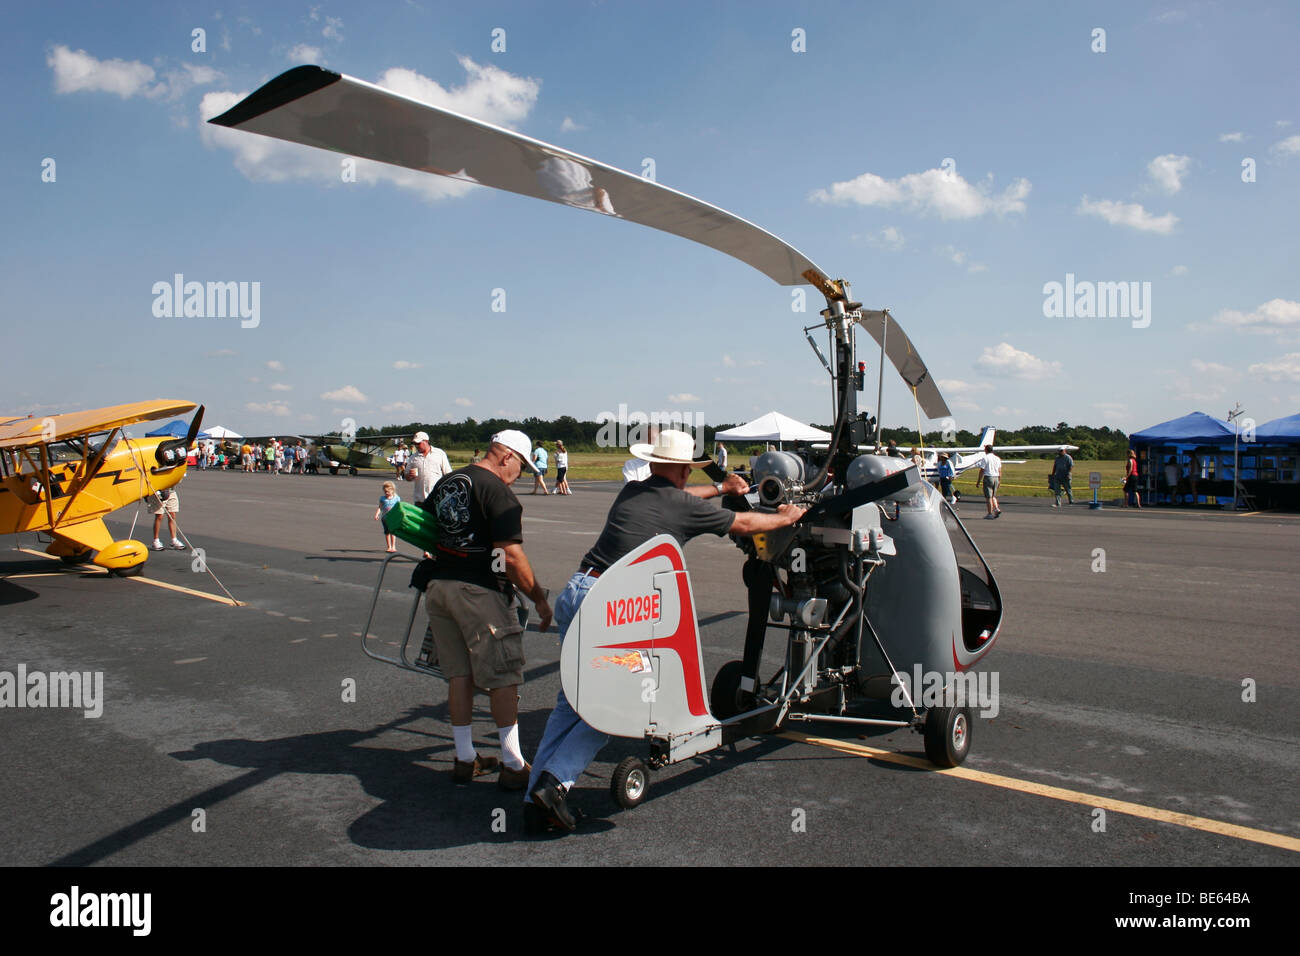 Gyrocopter being readied for flight at Louisa county airshow Stock Photo